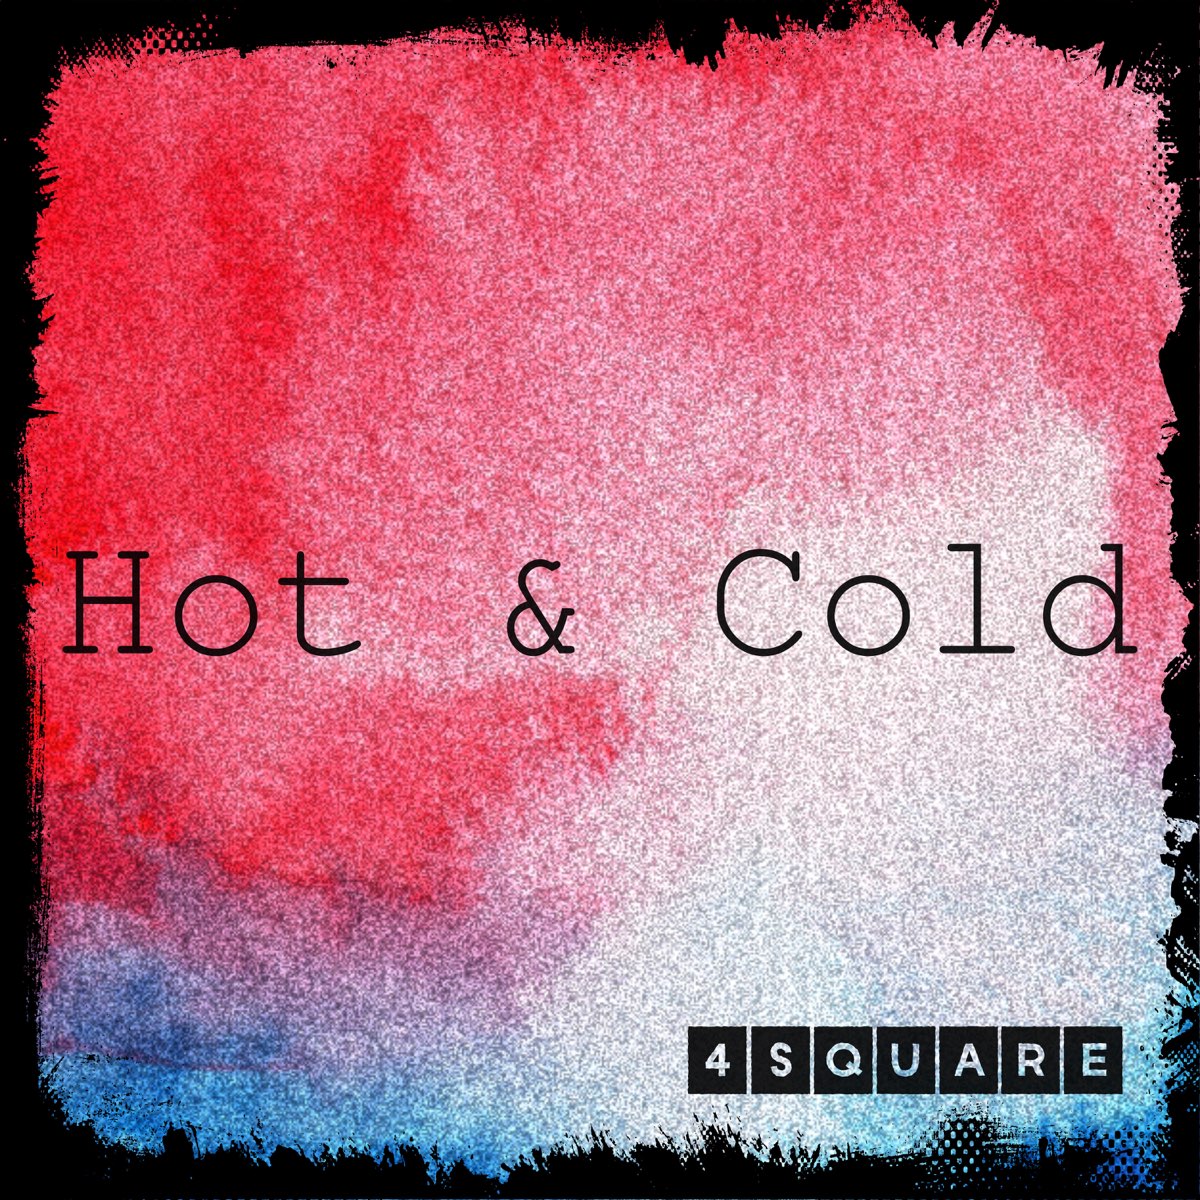 Hot Cold. 4mix hot and Cold. Cold музыка. Hot & Cold Эстетика. Cold music